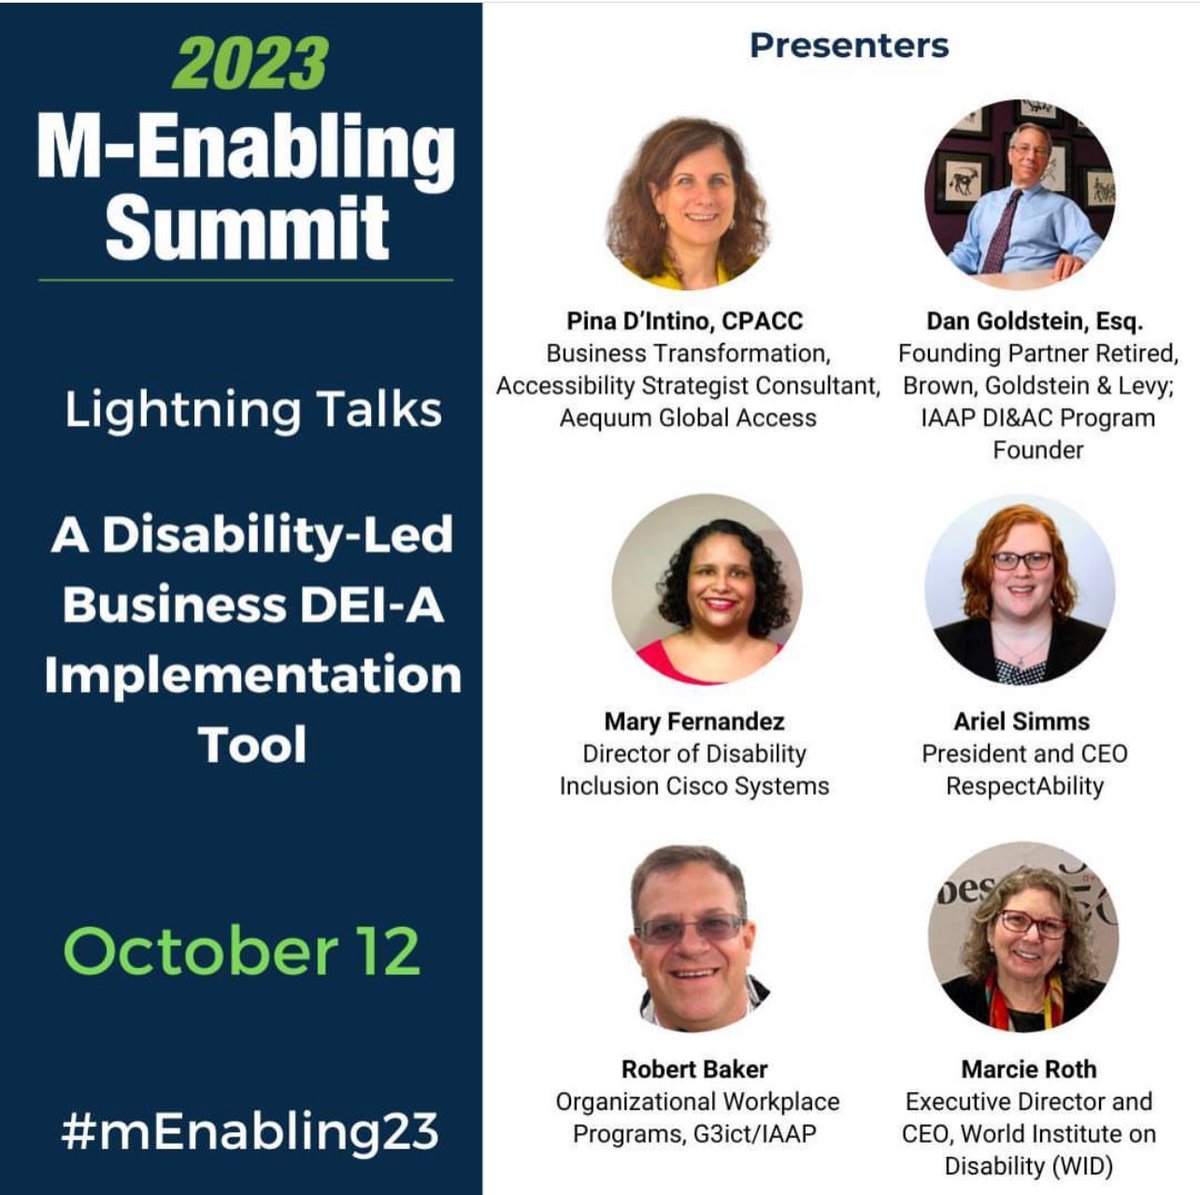 Check out WID Executive Director, Marcie Roth this week at #mEnabling23! It's not too late to register! buff.ly/3HSAsAF